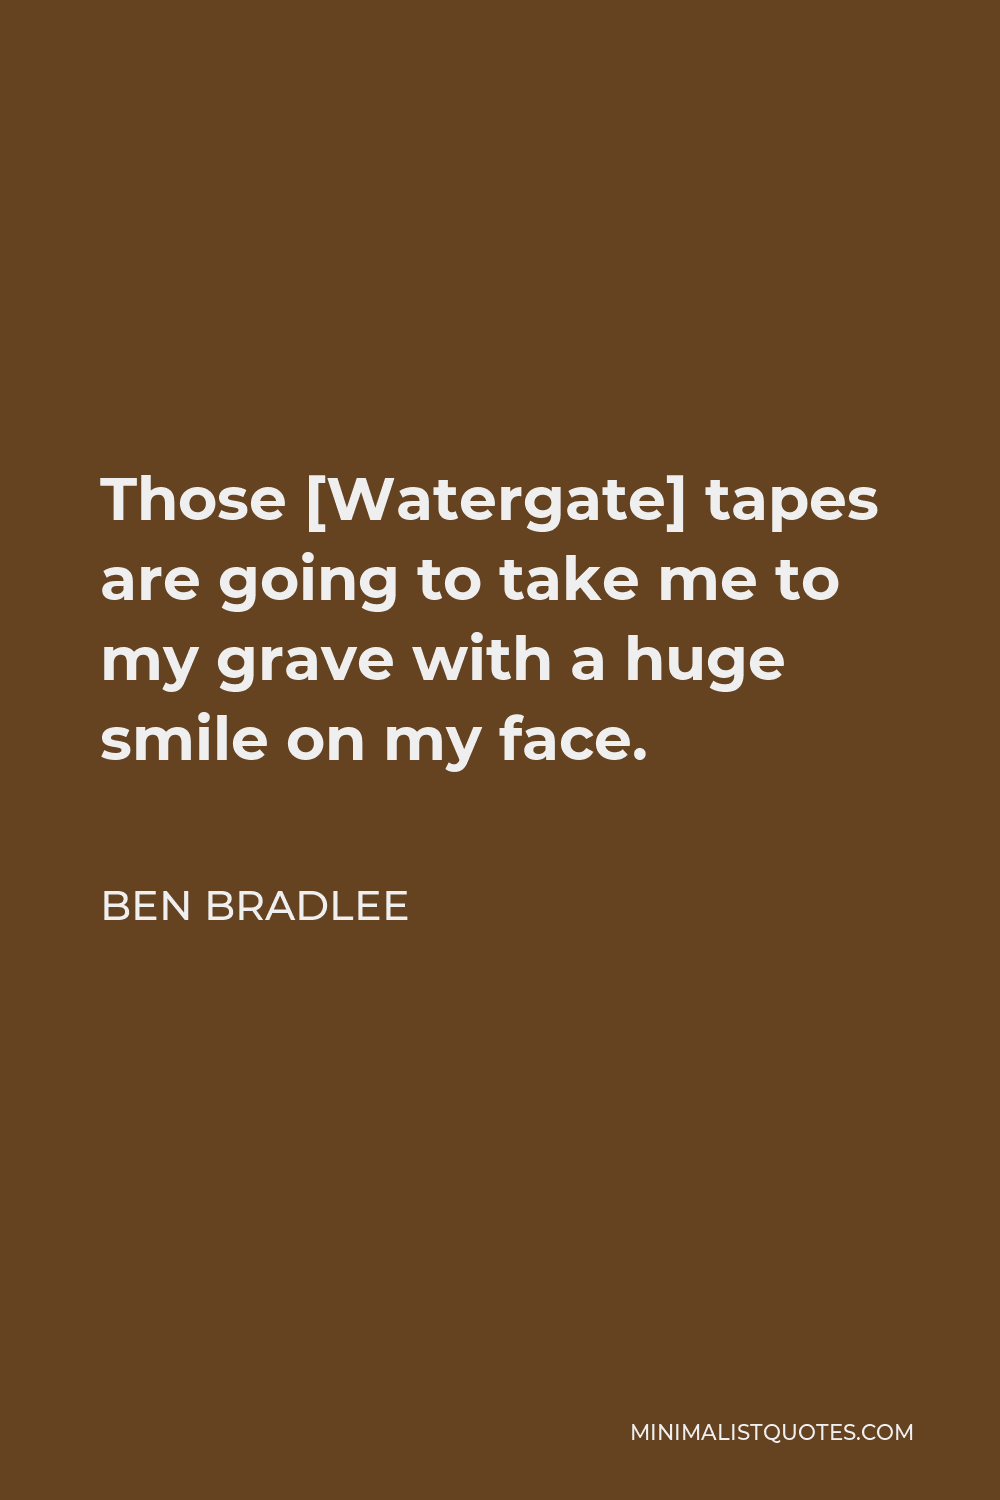 Ben Bradlee Quote - Those [Watergate] tapes are going to take me to my grave with a huge smile on my face.